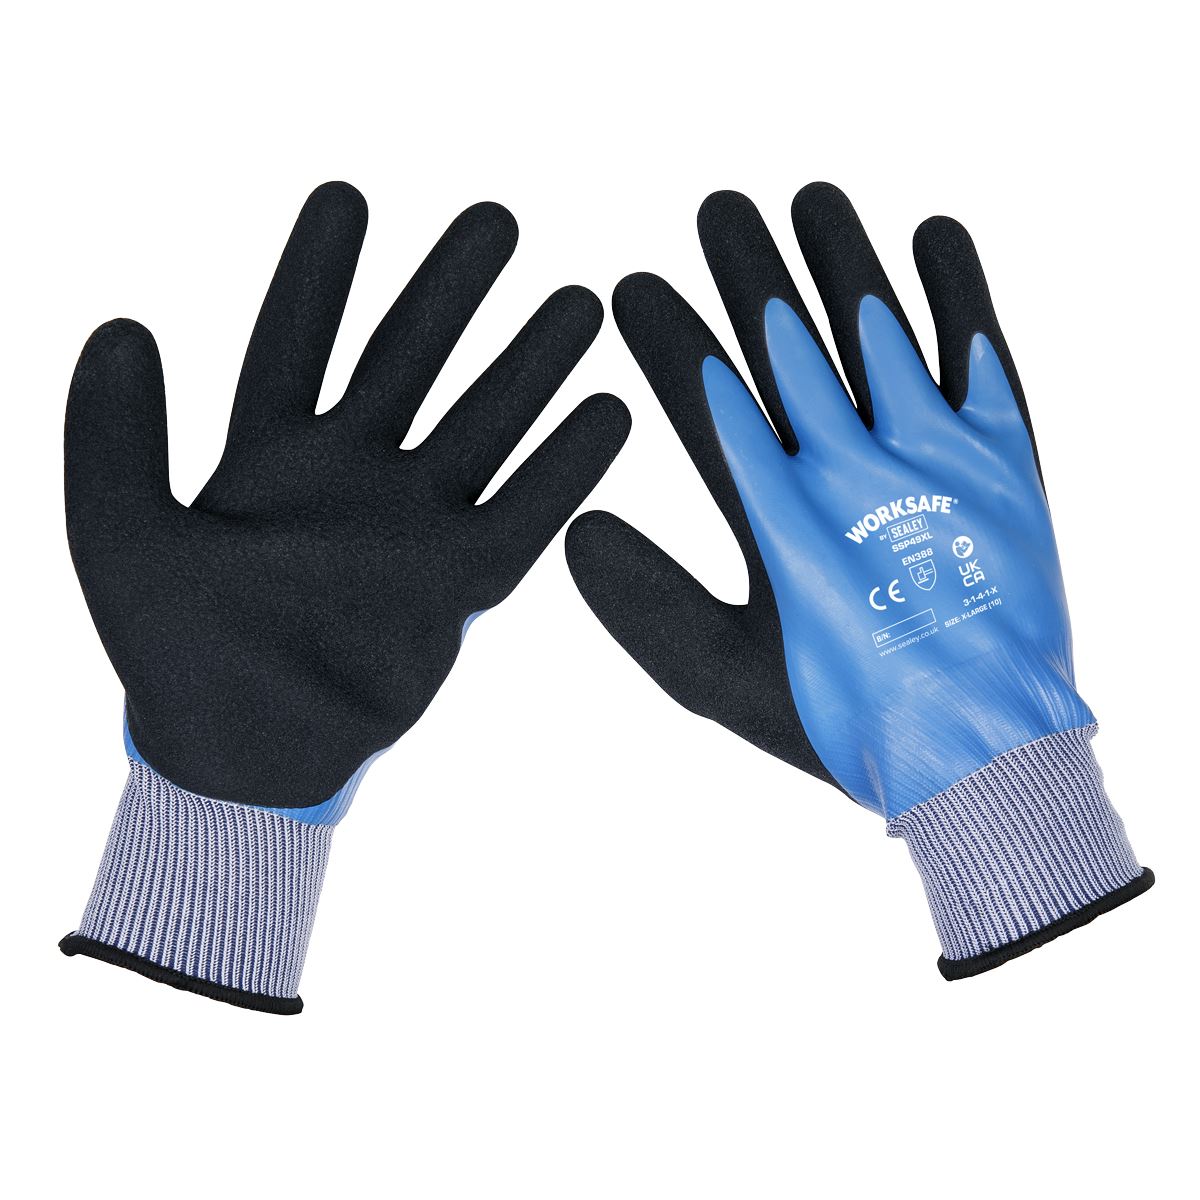 Worksafe by Sealey Waterproof Latex Gloves - (X-Large) - Pack of 6 Pairs